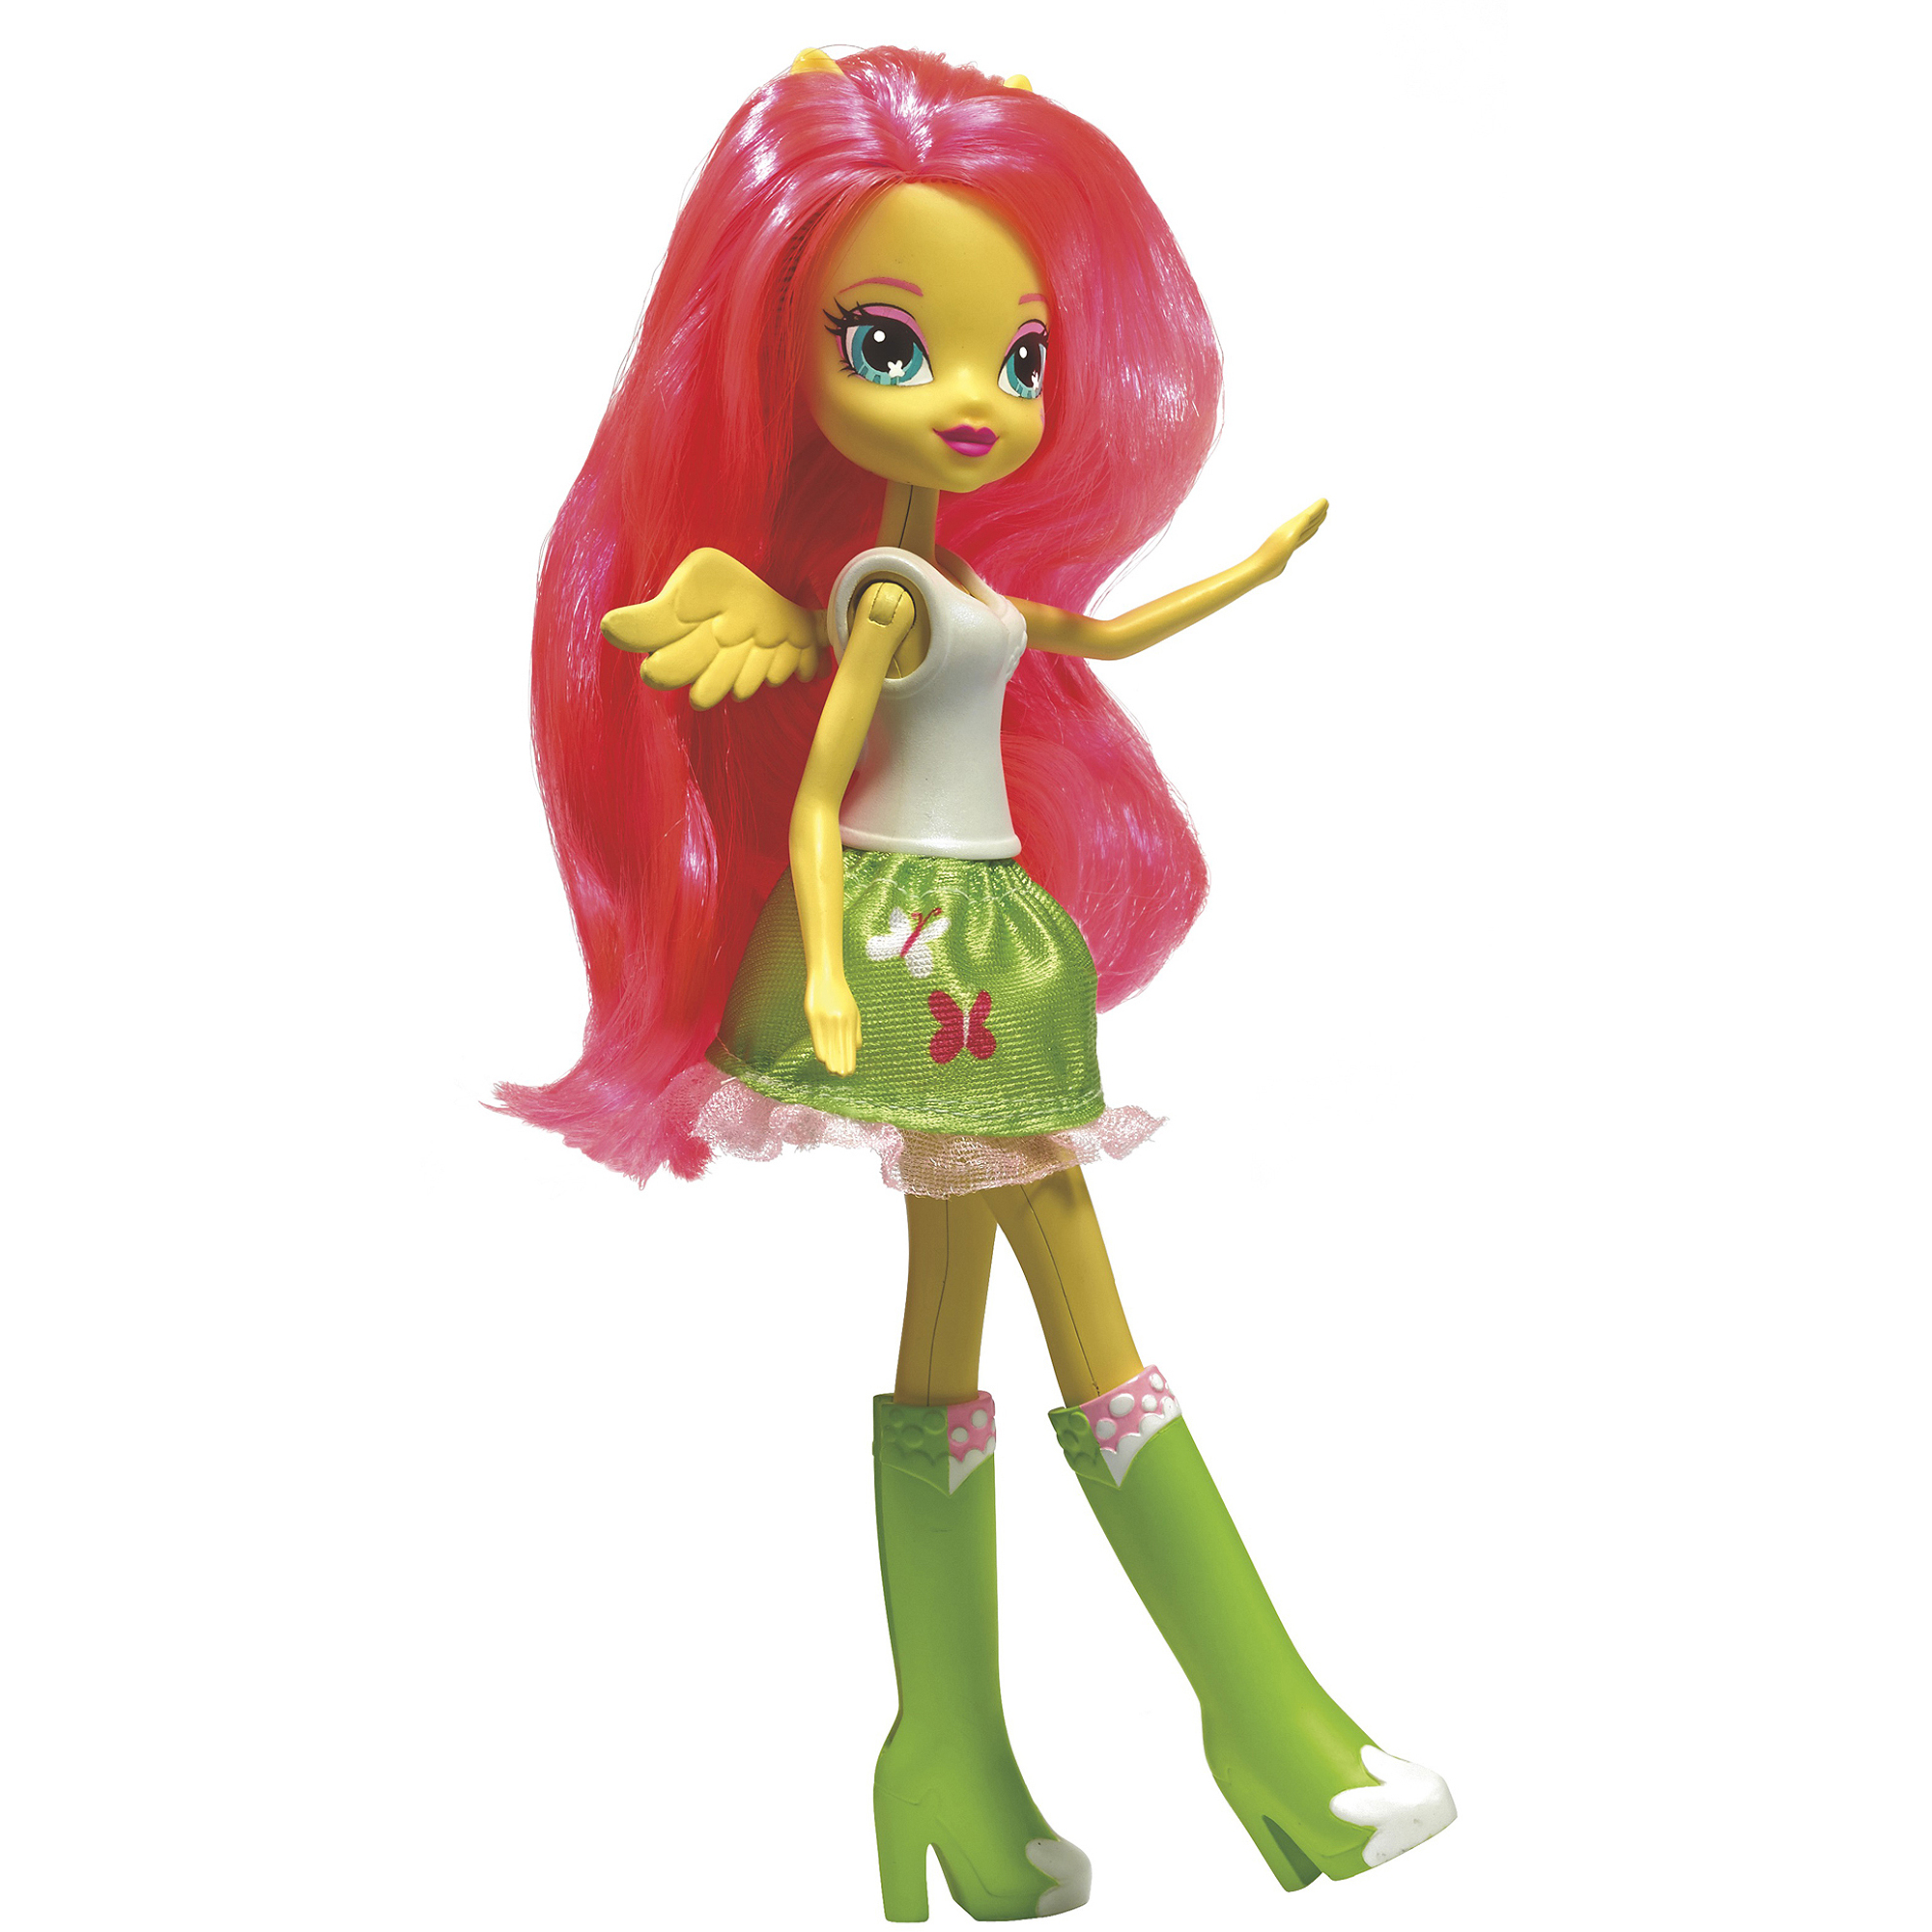 My Little Pony Equestria Girls Collection Fluttershy Doll - image 1 of 6